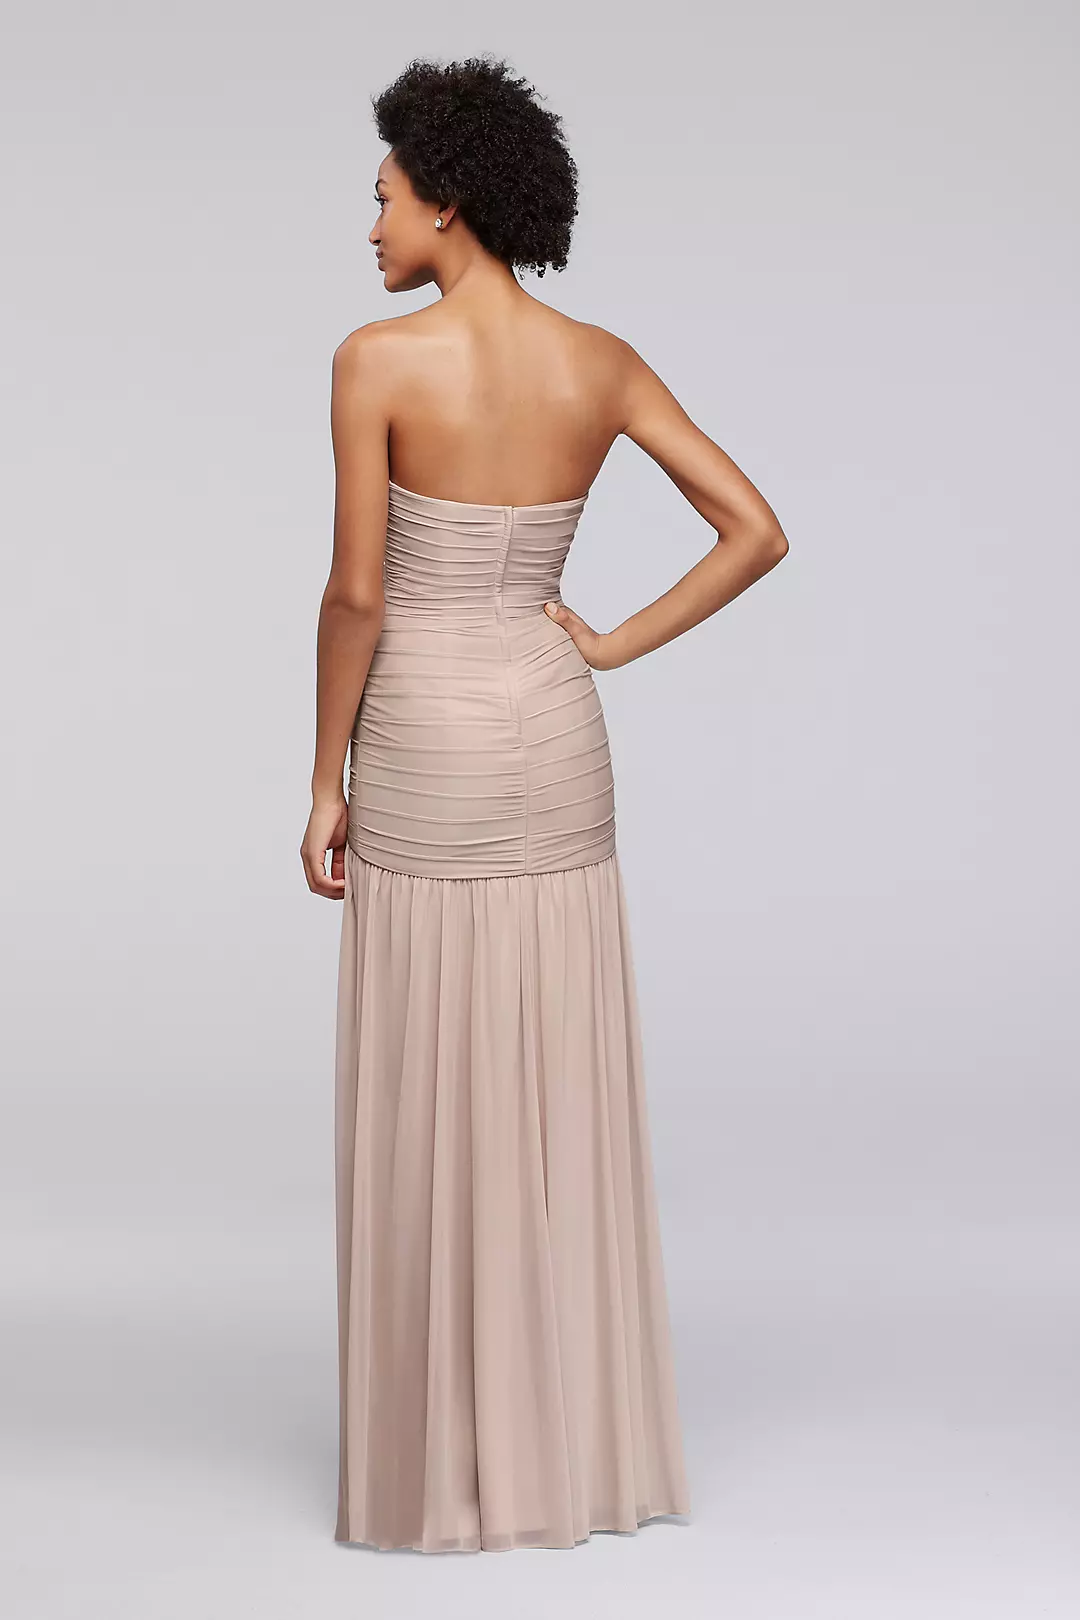 Long Fit and Flare Strapless Bridesmaid Dress  Image 2